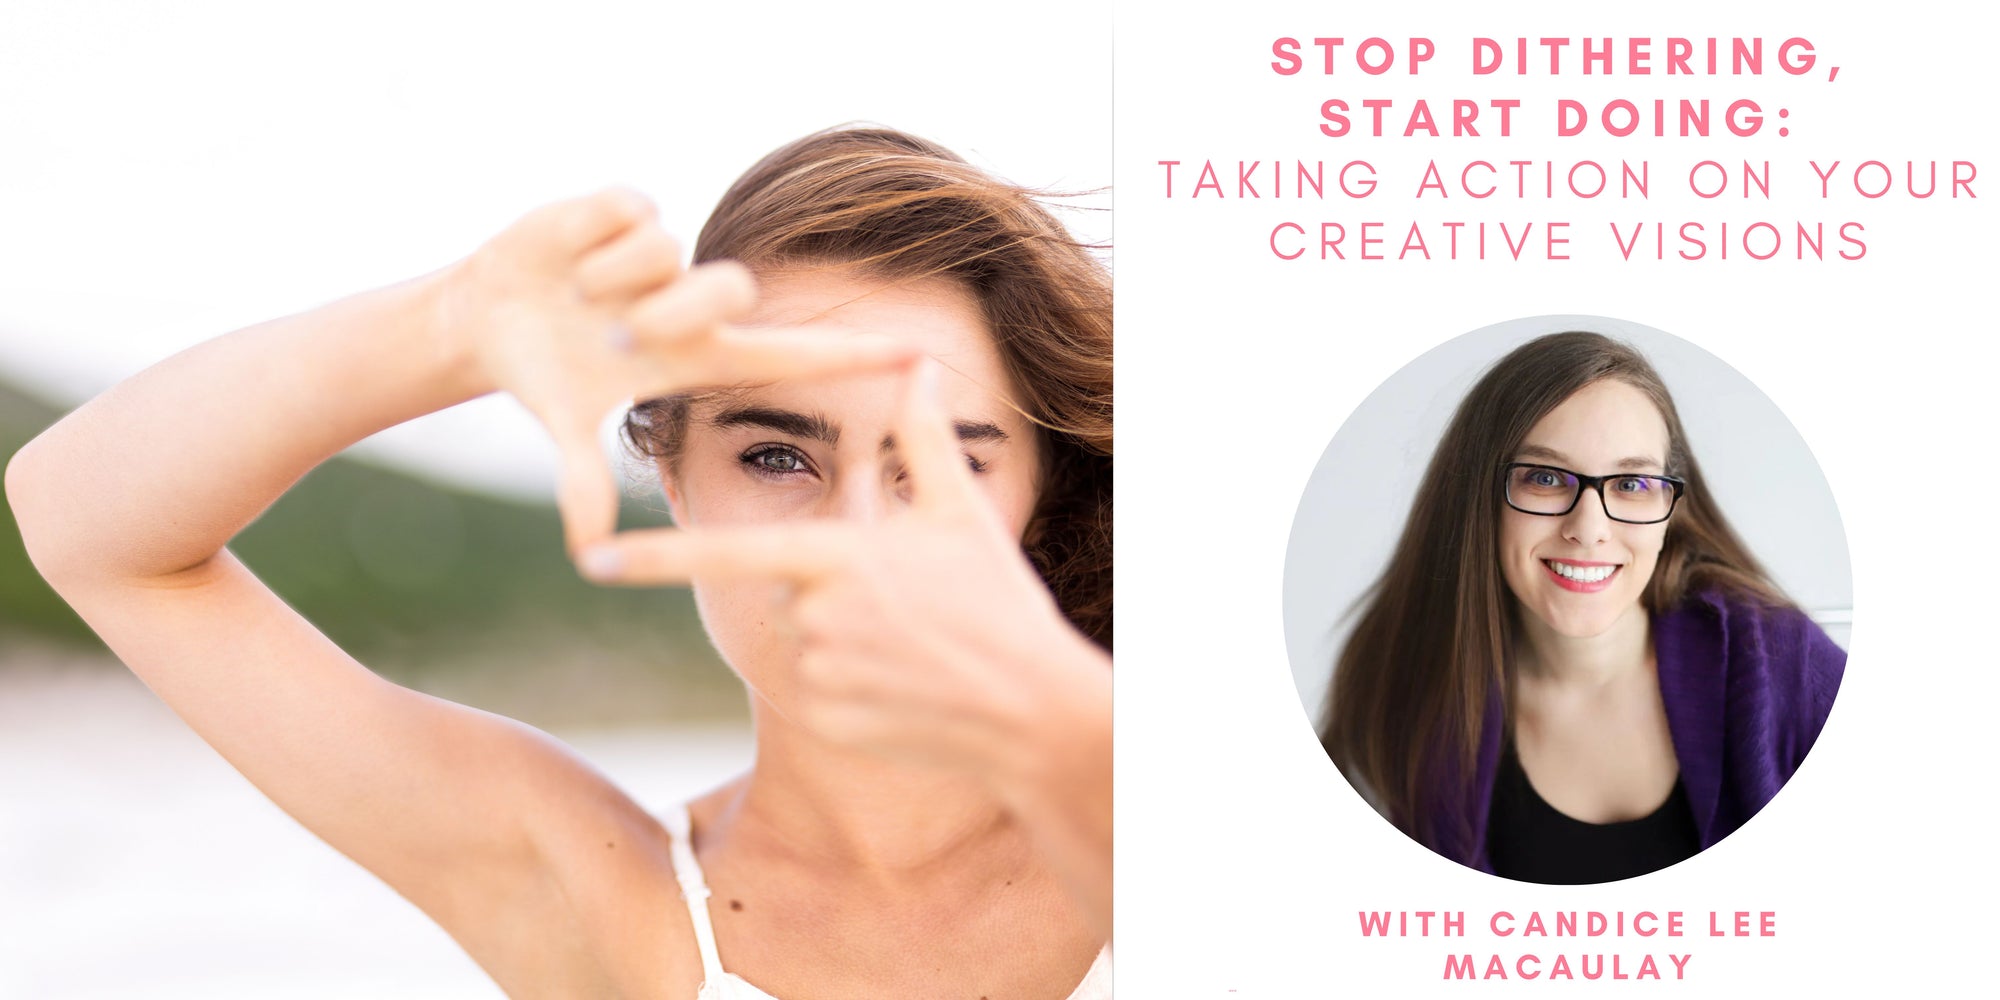 Stop Dithering,  Start Doing  Taking Action on Your Creative Visions with Candice Lee MacAulay